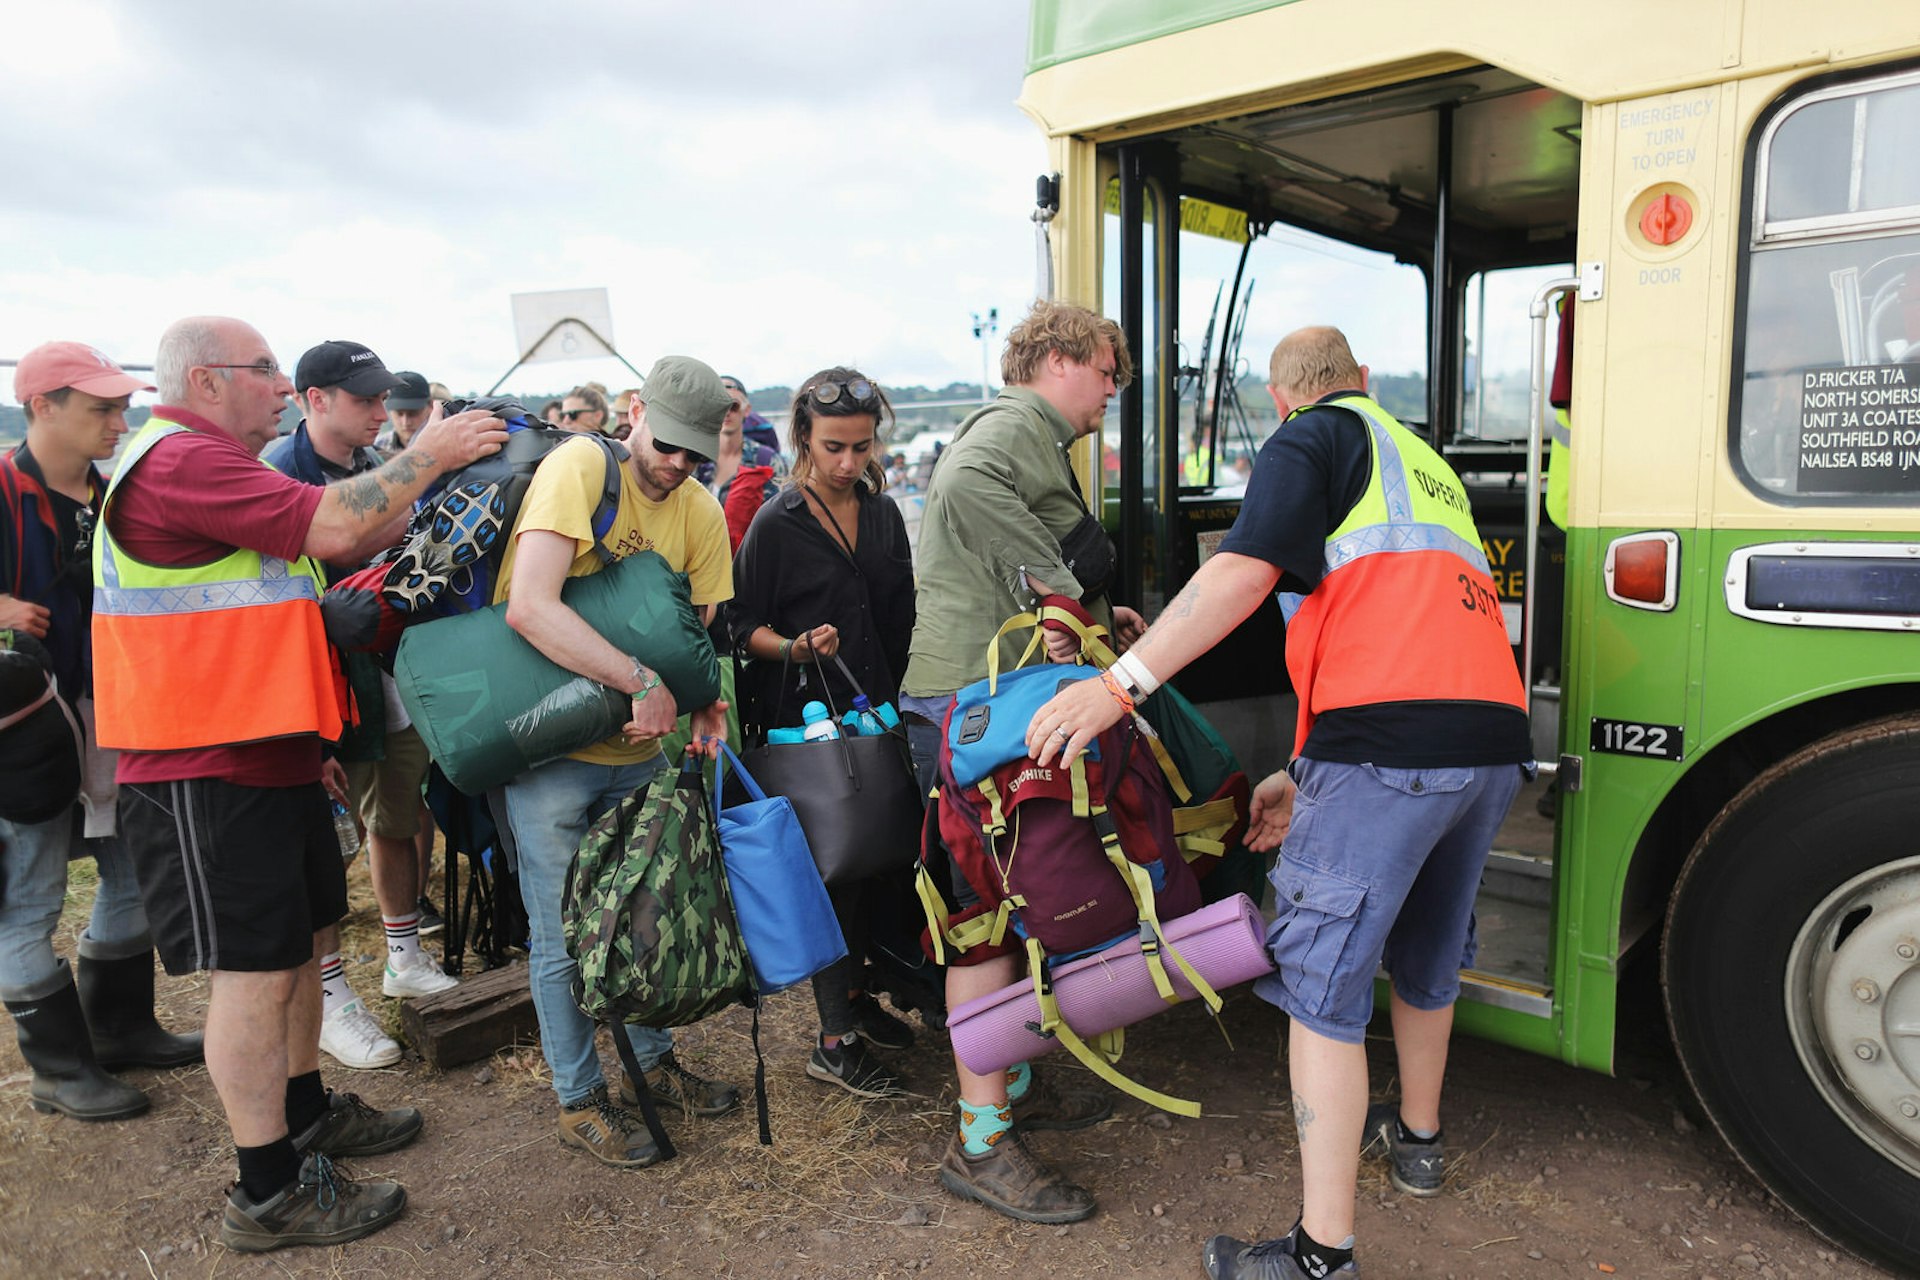 Glastonbury guide - Festival goers are helped onto a bus by supervisors as they leave the Glastonbury Festival site at Worthy Farm in Pilton on June 26, 2017 near Glastonbury, England. Glastonbury Festival of Contemporary Performing Arts is the largest greenfield festival in the world. It was started by Michael Eavis in 1970 when several hundred hippies paid just £1, and now attracts more than 175,000 people 